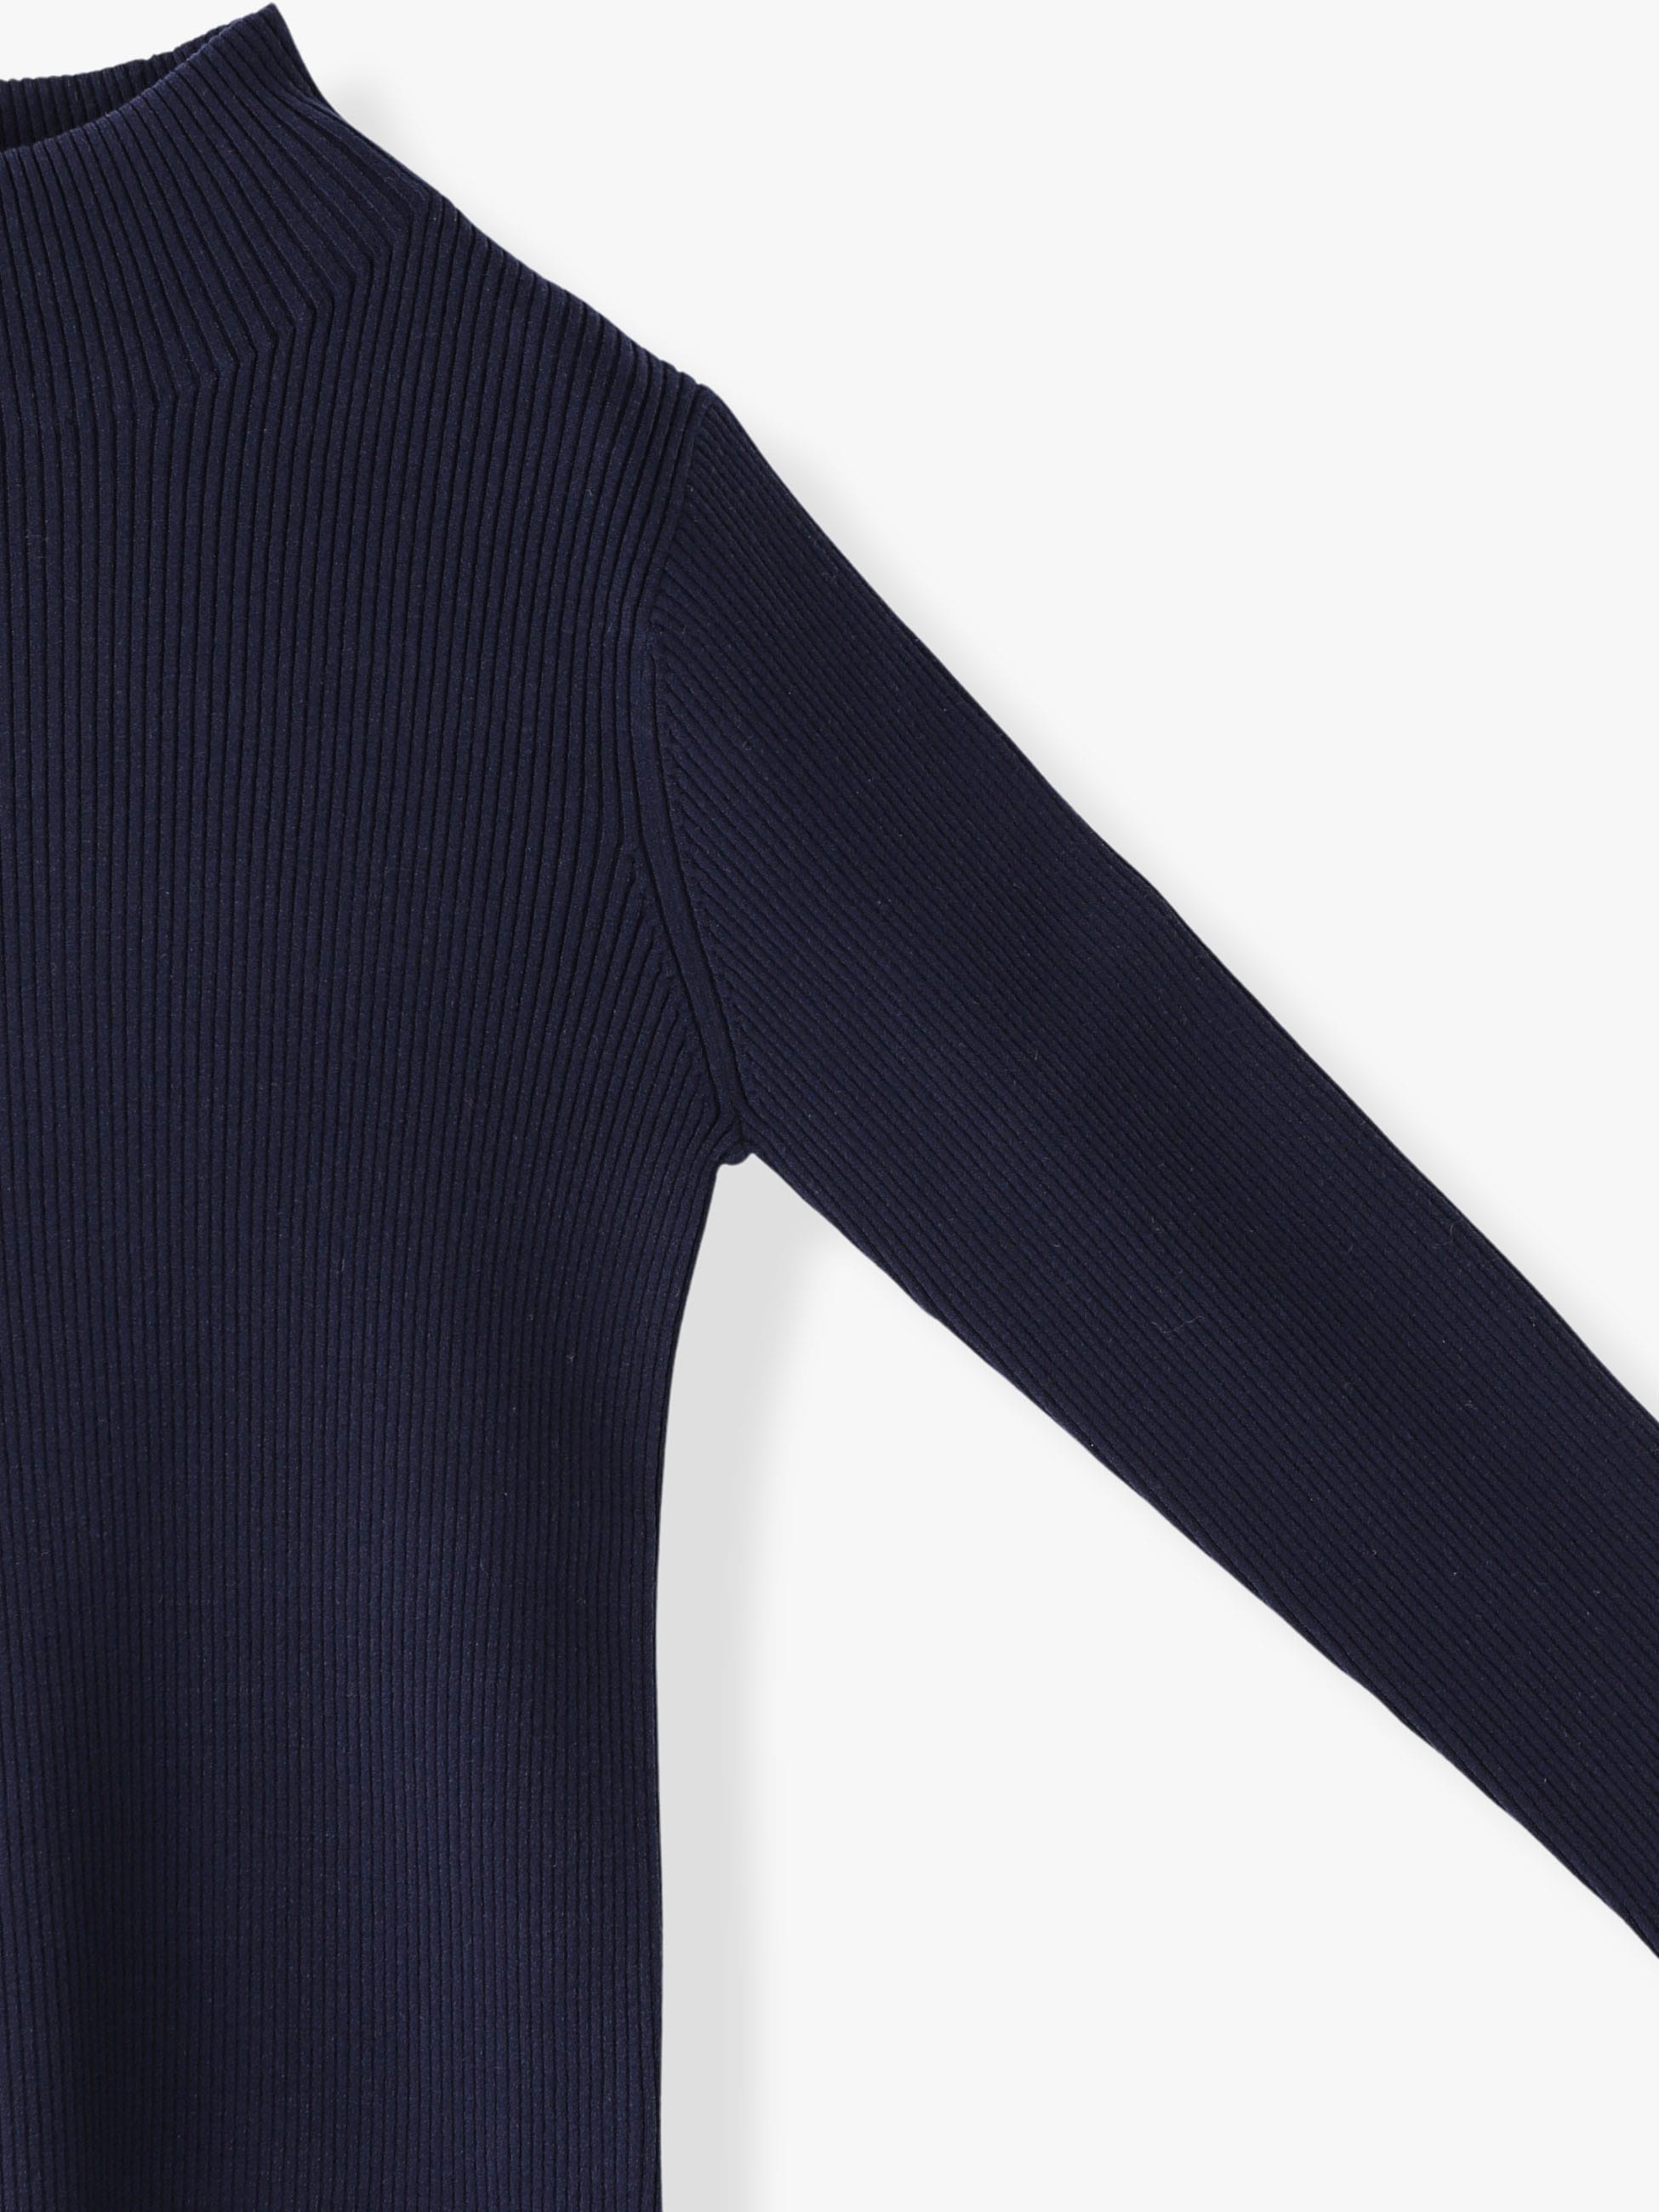 Bell Sleeve Knit Pullover 詳細画像 navy 2